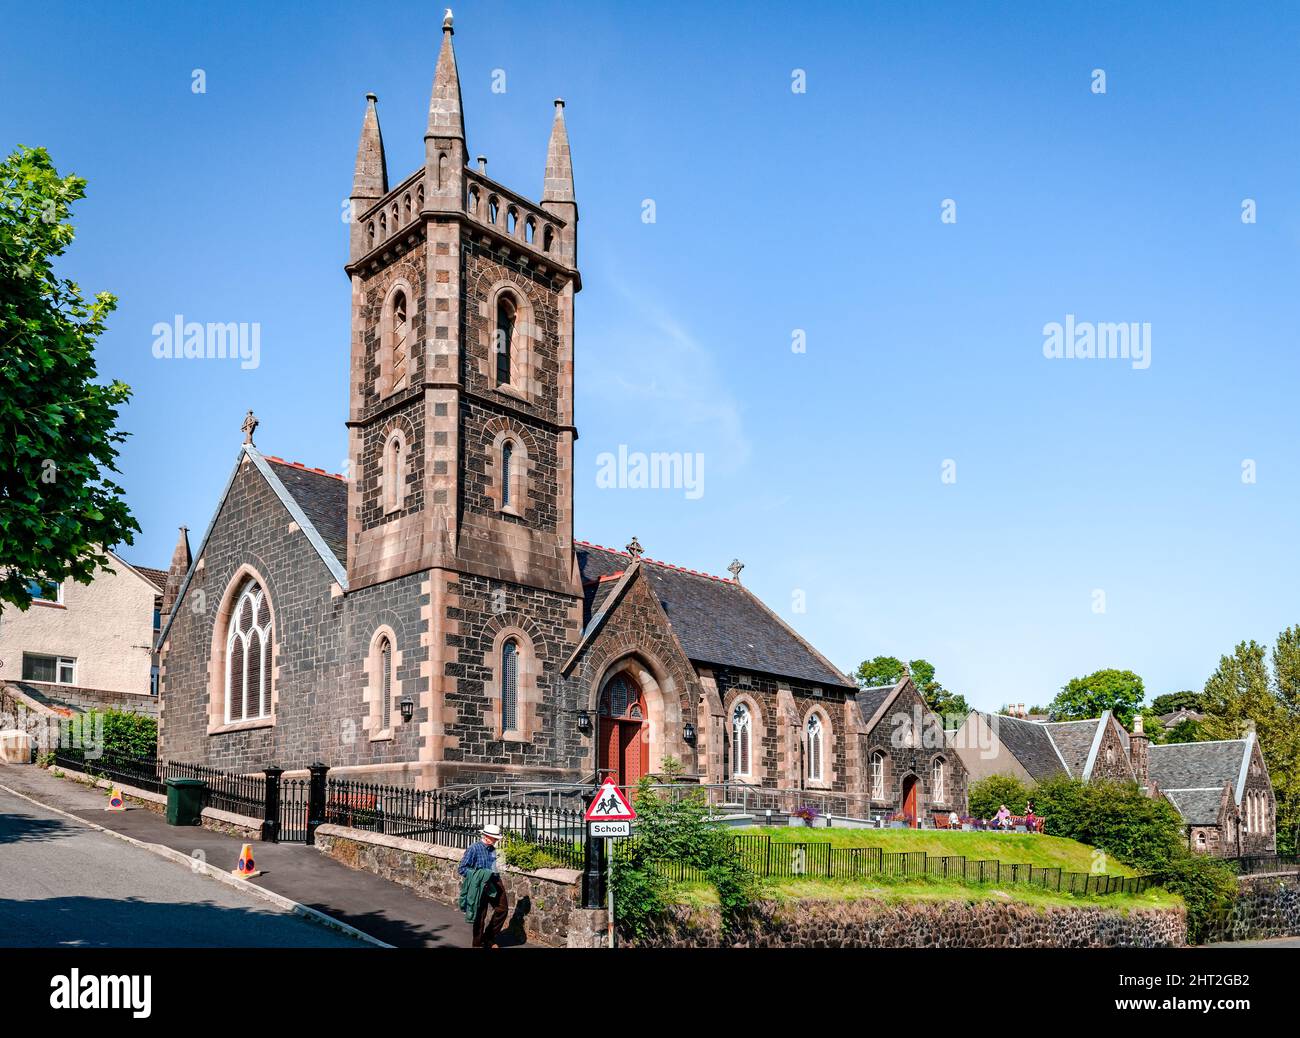 The Church of Scotland and the Church Hall at Argyll Terrace and Victoria St on the upper part of the town, built in 1897. Tobermory, Scotland. Stock Photo